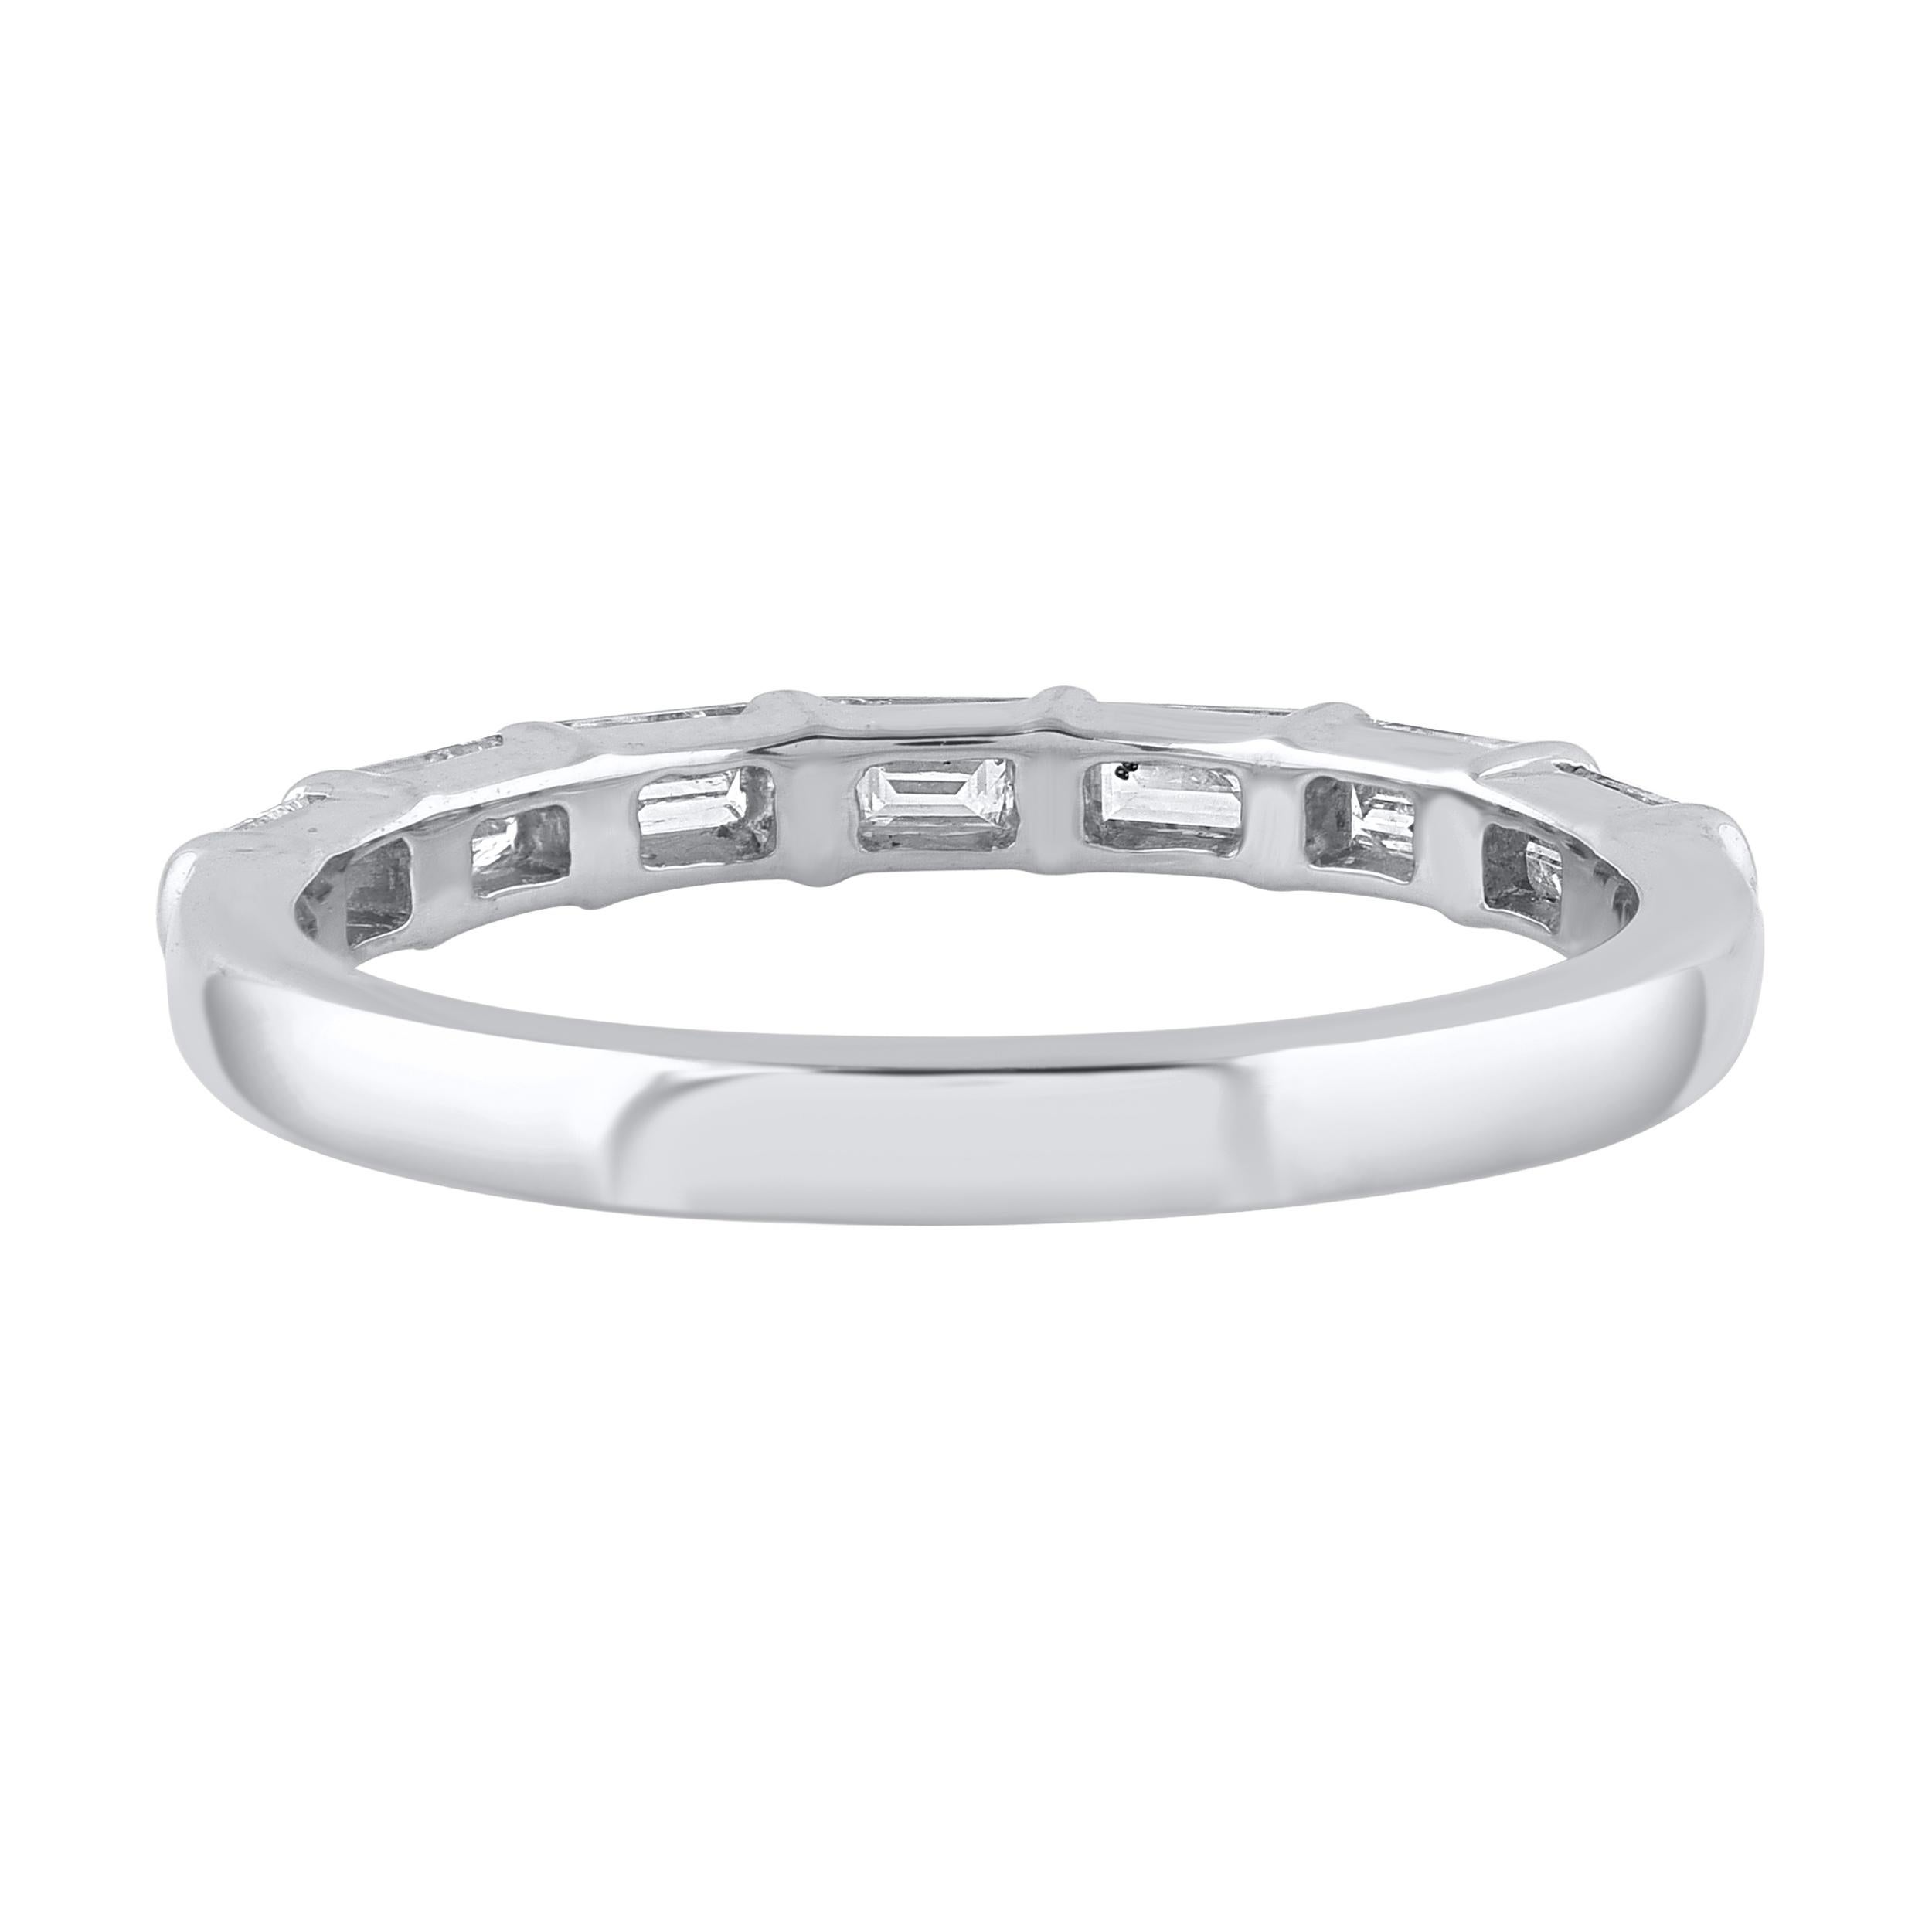 Contemporary TJD 0.55 Carat Baguette Diamond Seven Stone Band Ring in 14 Karat White Gold For Sale